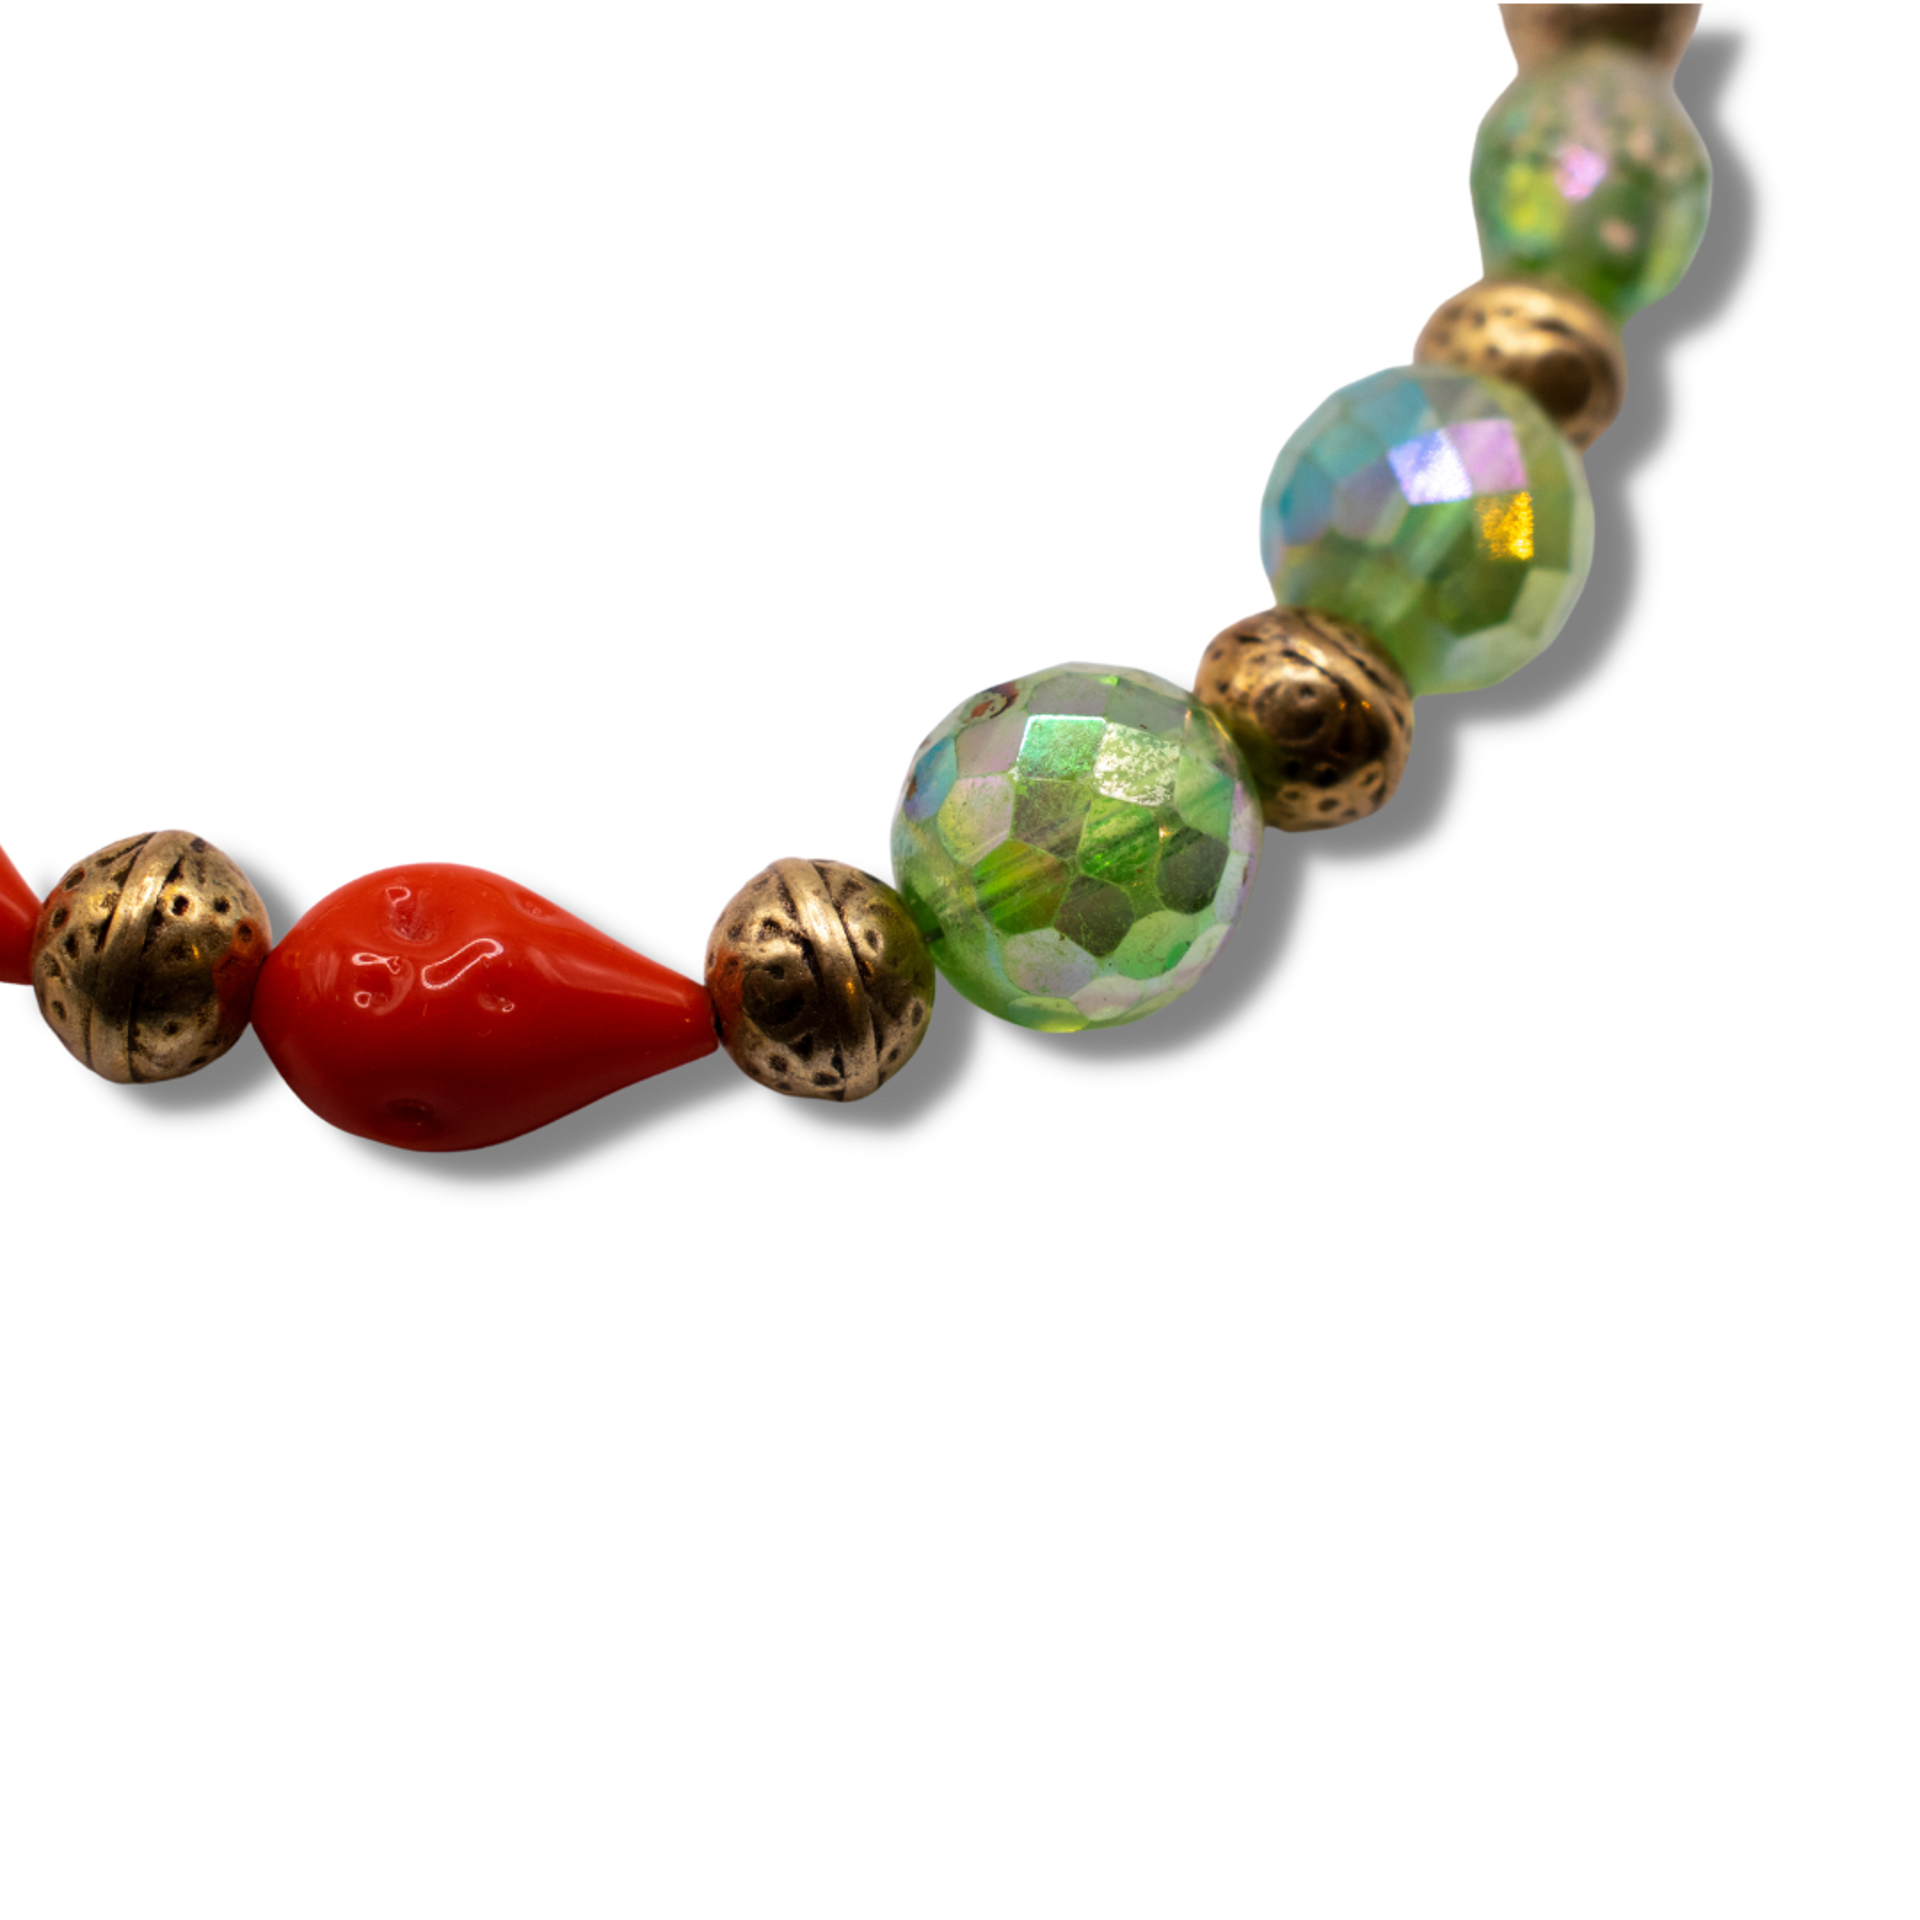 Colorful Old Necklace by Debra Nevin